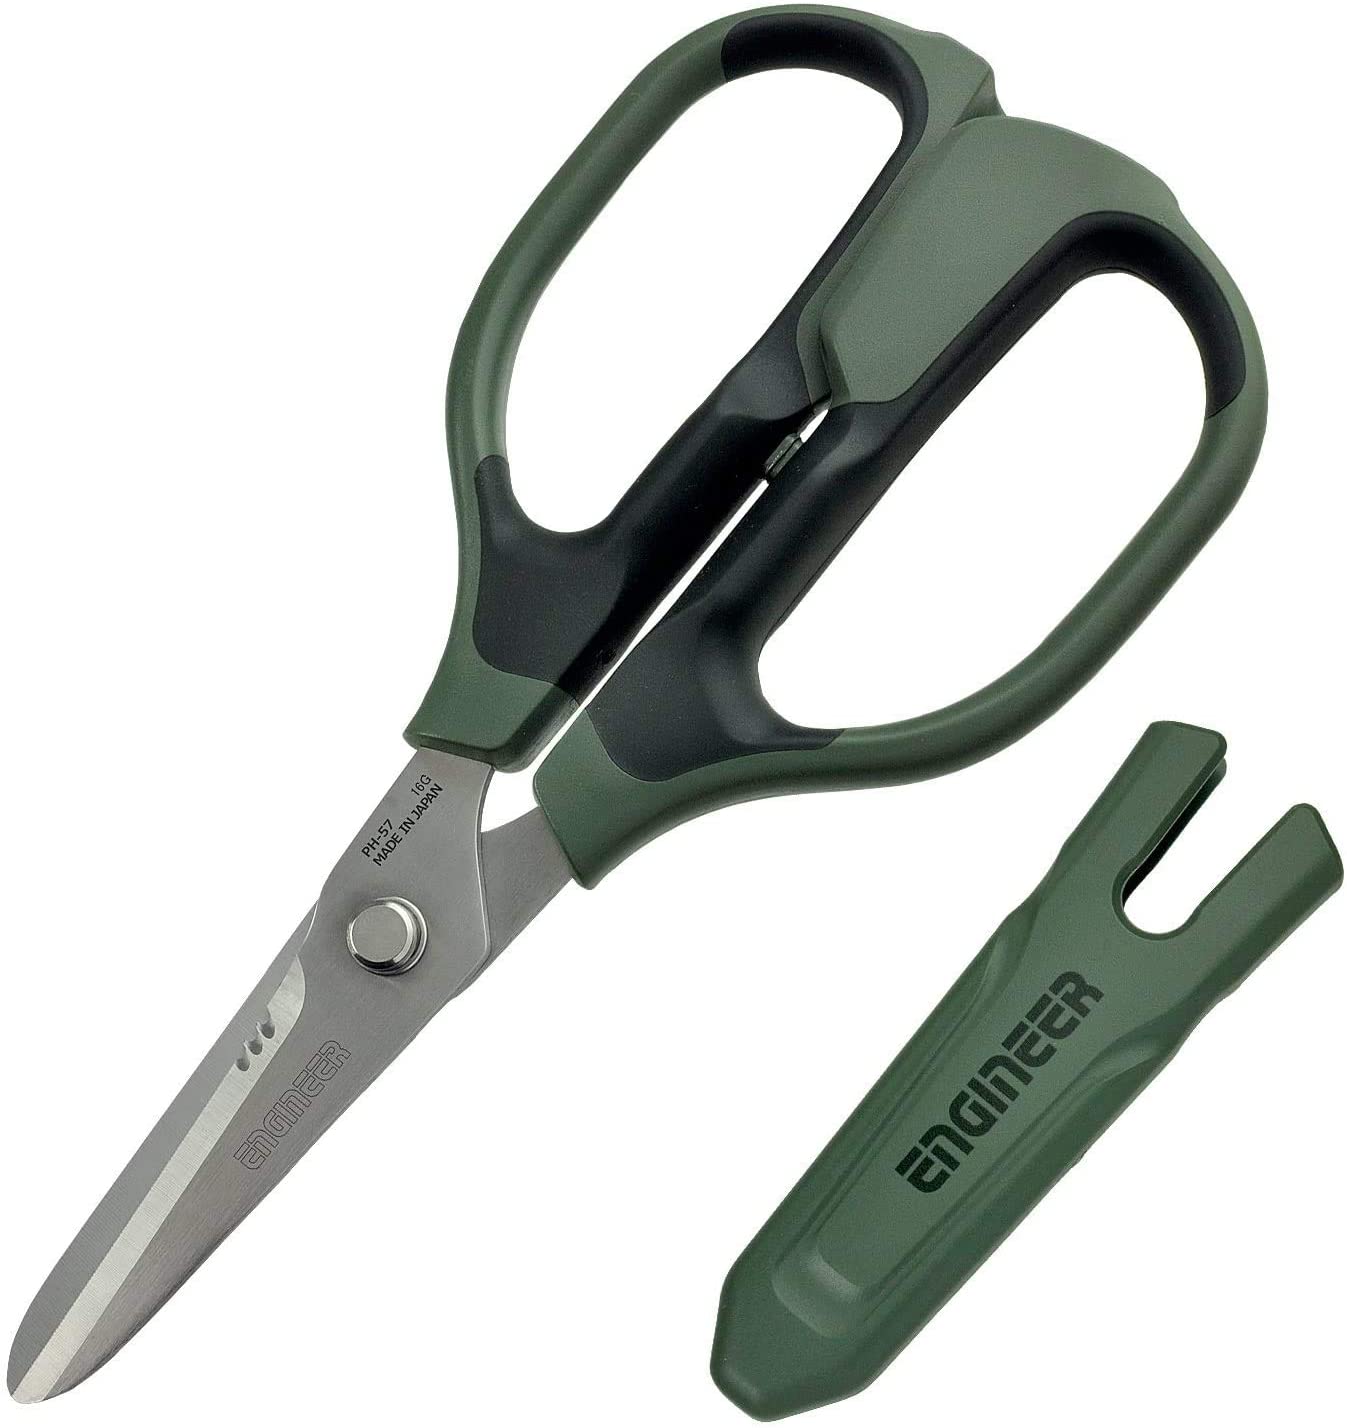 Engineer Inc. PH-57 Versatile Scissors With Integral Finger Guard - Made In Japan. - MPR Tools & Equipment